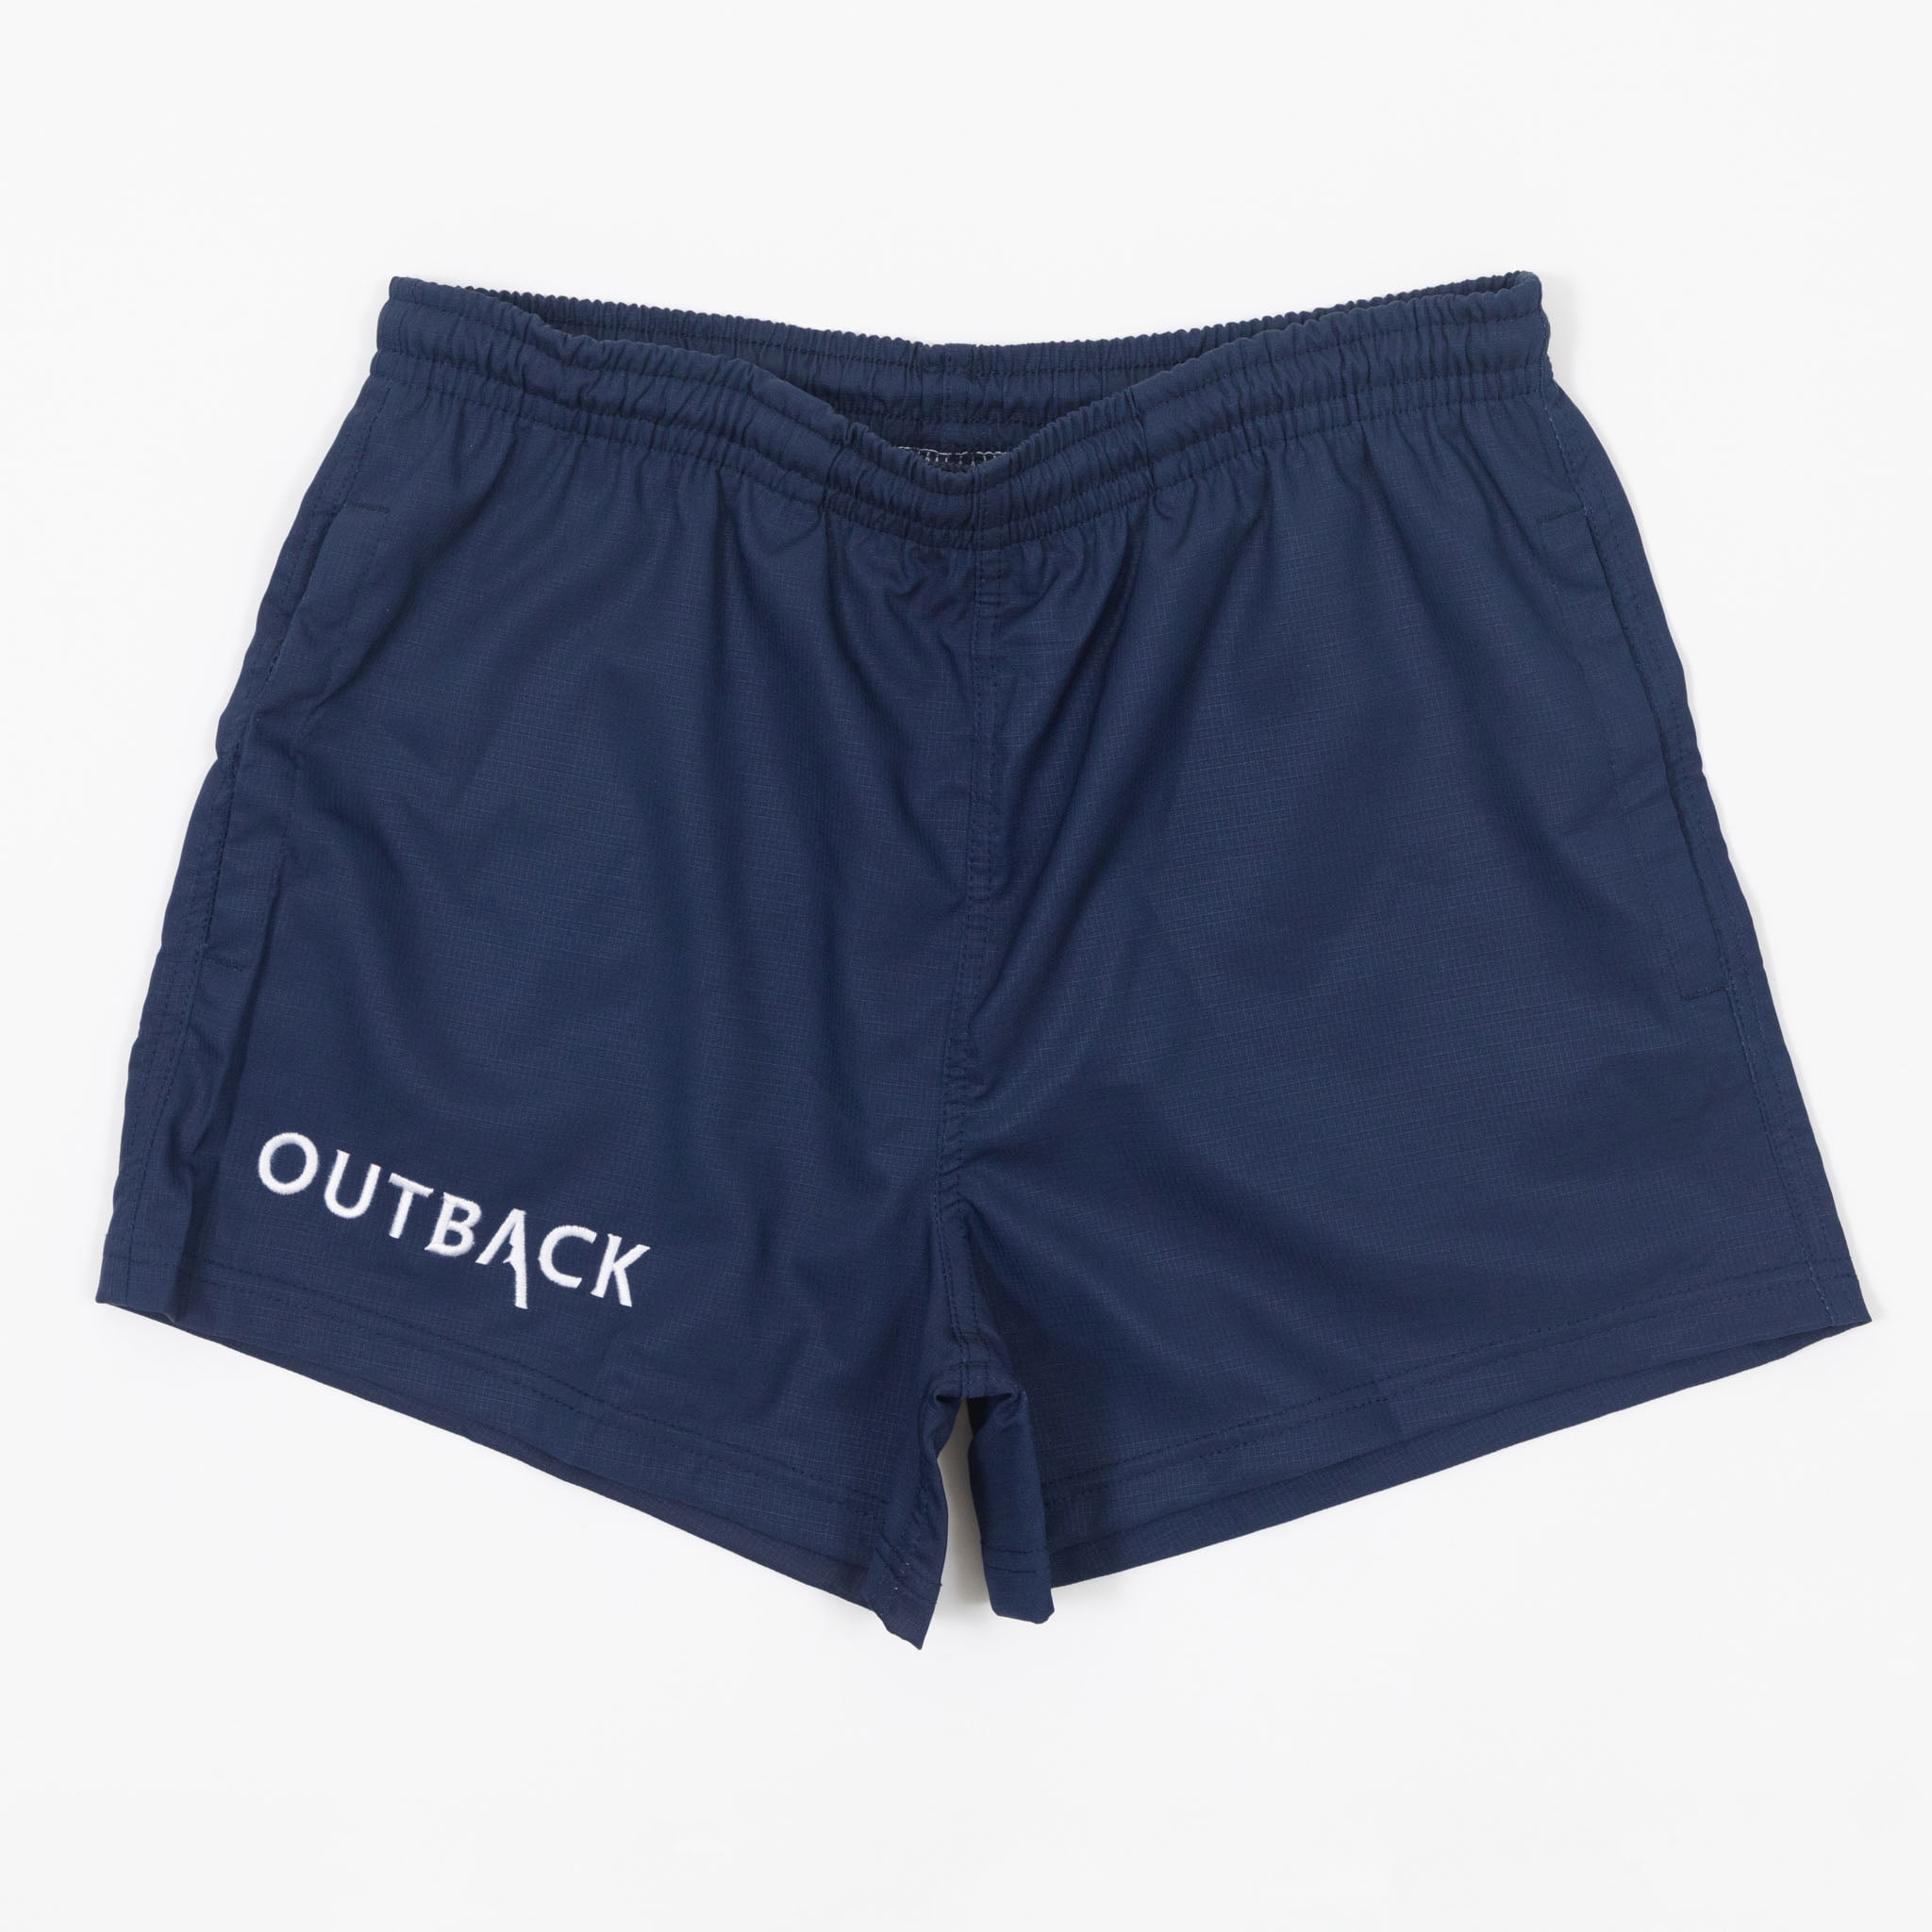 Outback Outfitters Clothing Archives - Outback Outfitters